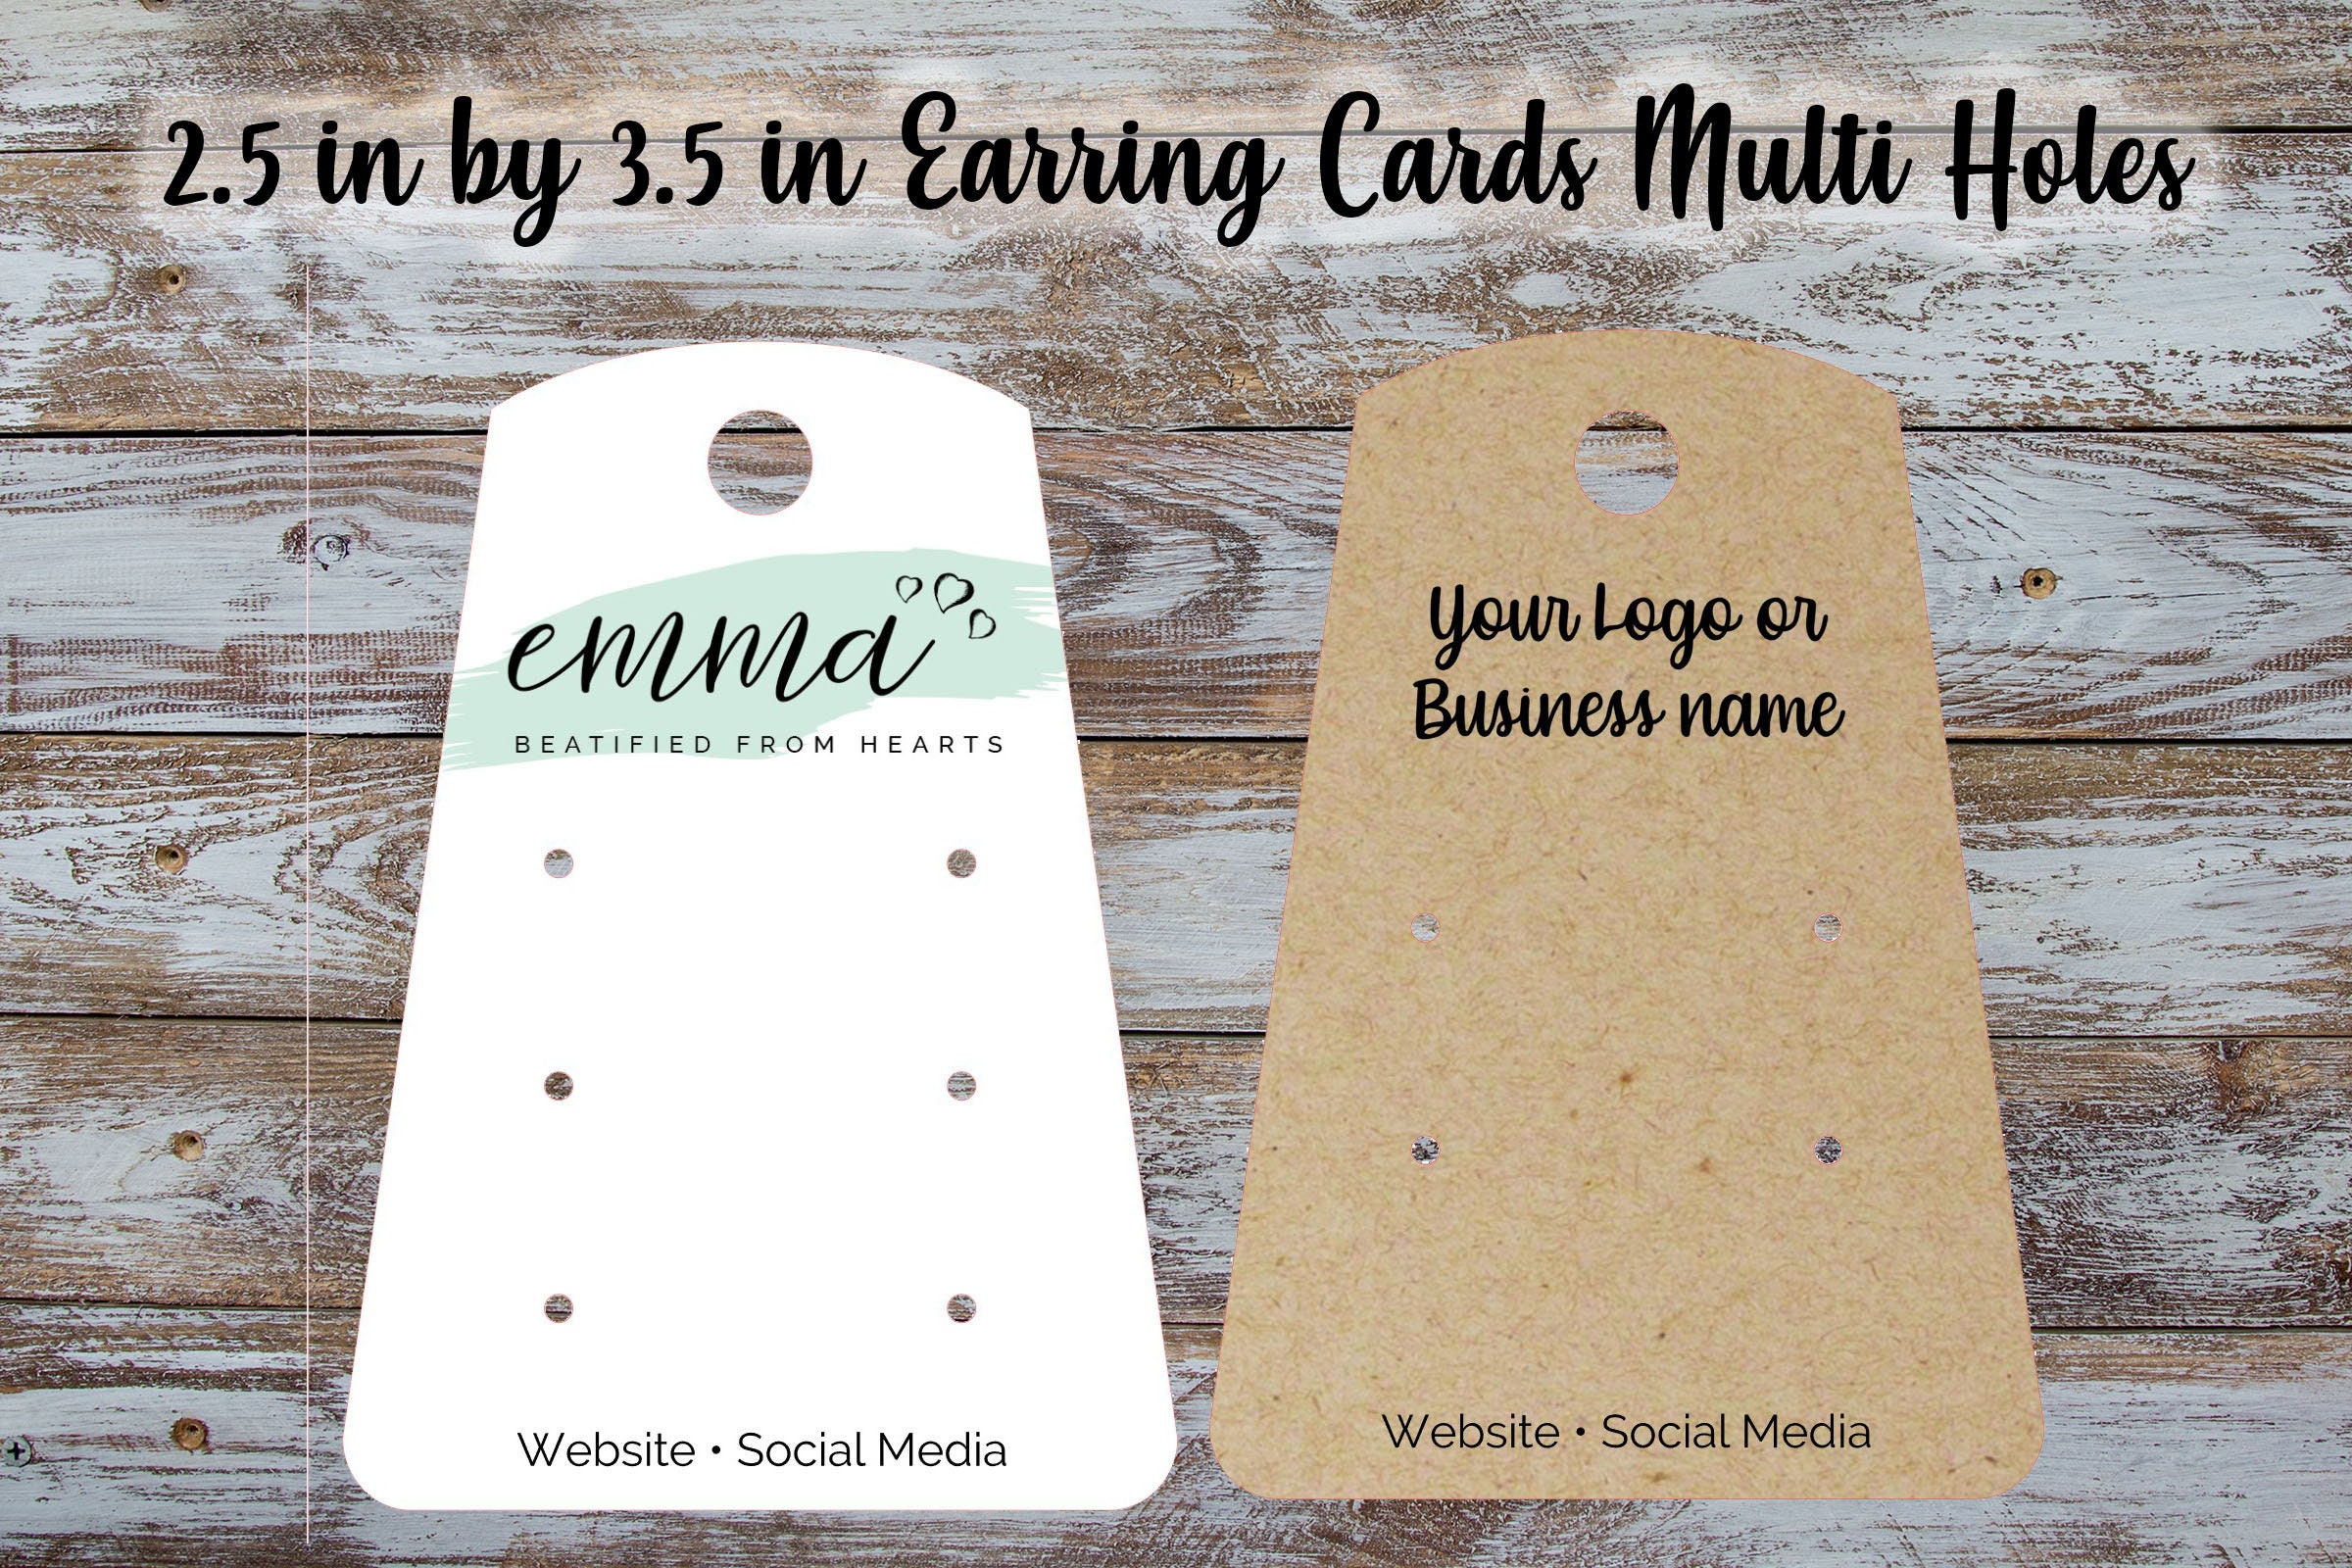 Custom Multi Hole Earring Display Cards 2.5 Inch by 3.5 Inches